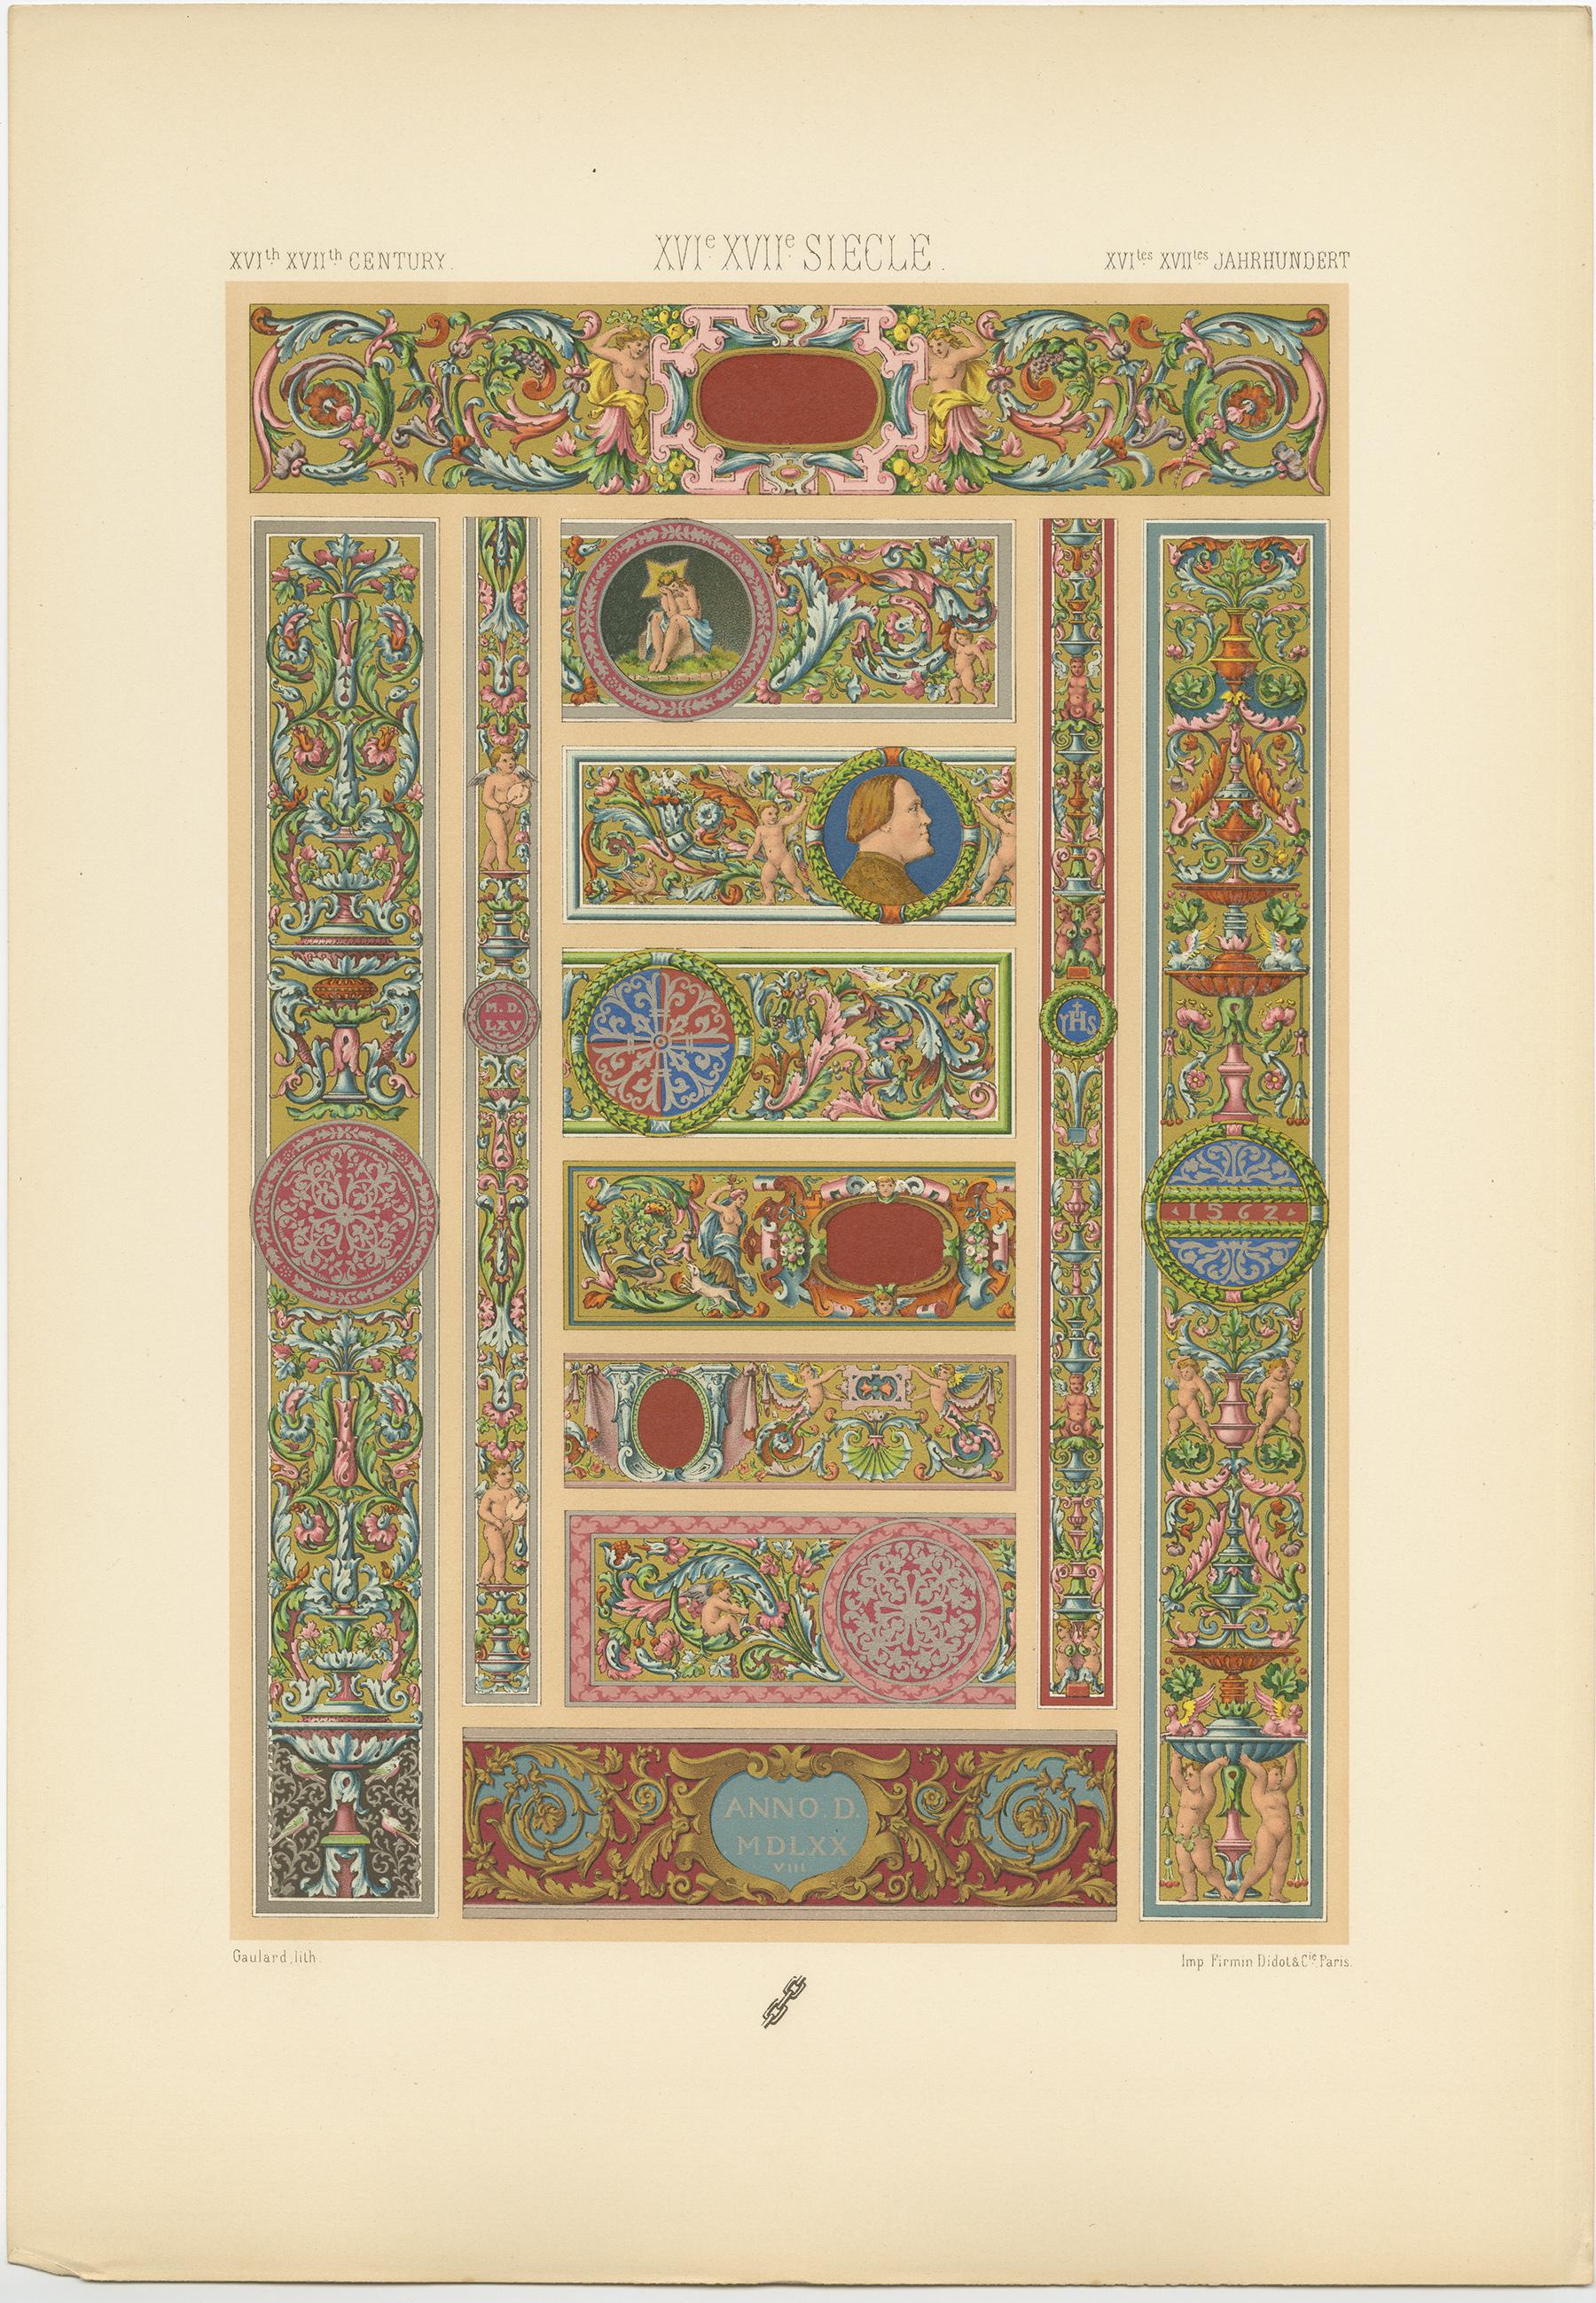 Antique print titled '16th Century - XVIc Siècle - XVILes Jahrhundert'. Chromolithograph of Italian manuscripts decorations second half of the 16th century ornaments. This print originates from 'l'Ornement Polychrome' by Auguste Racinet. Published